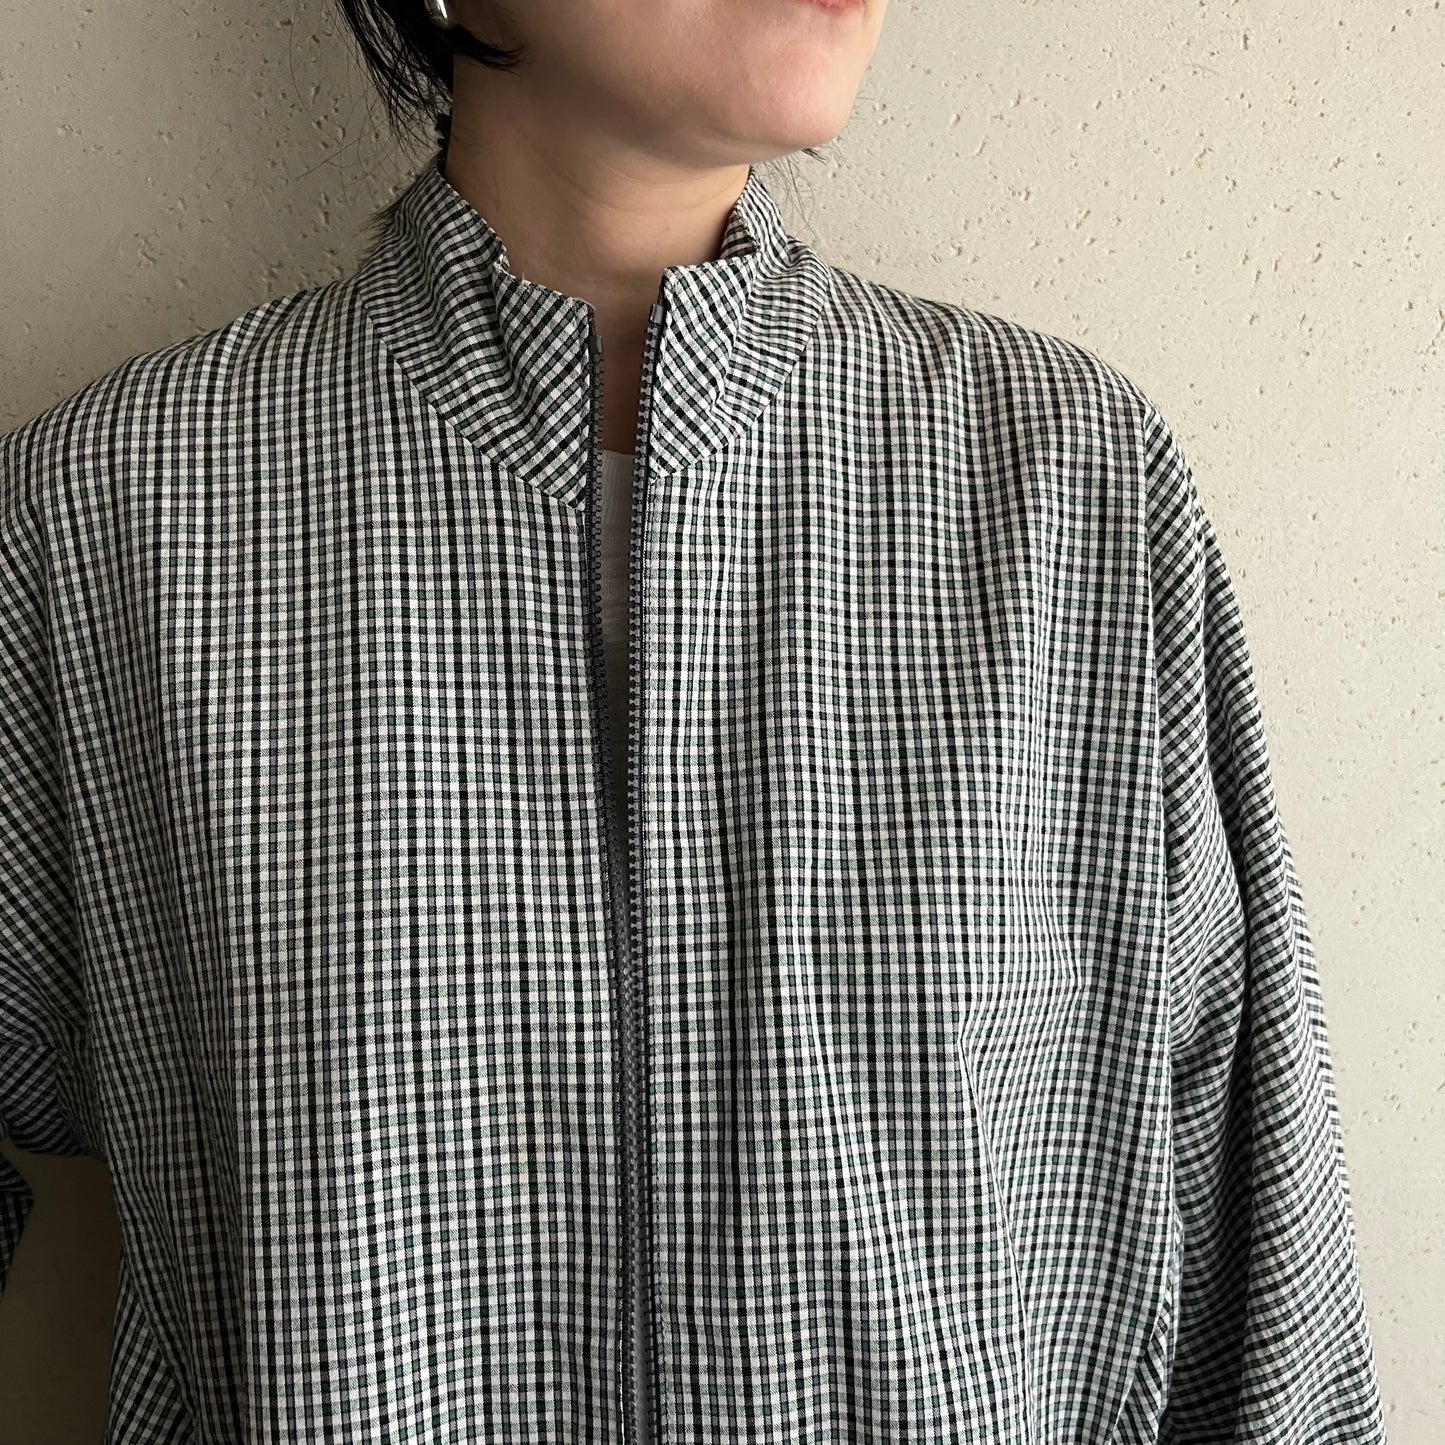 90s Plaid Light Jacket Made in West Germany